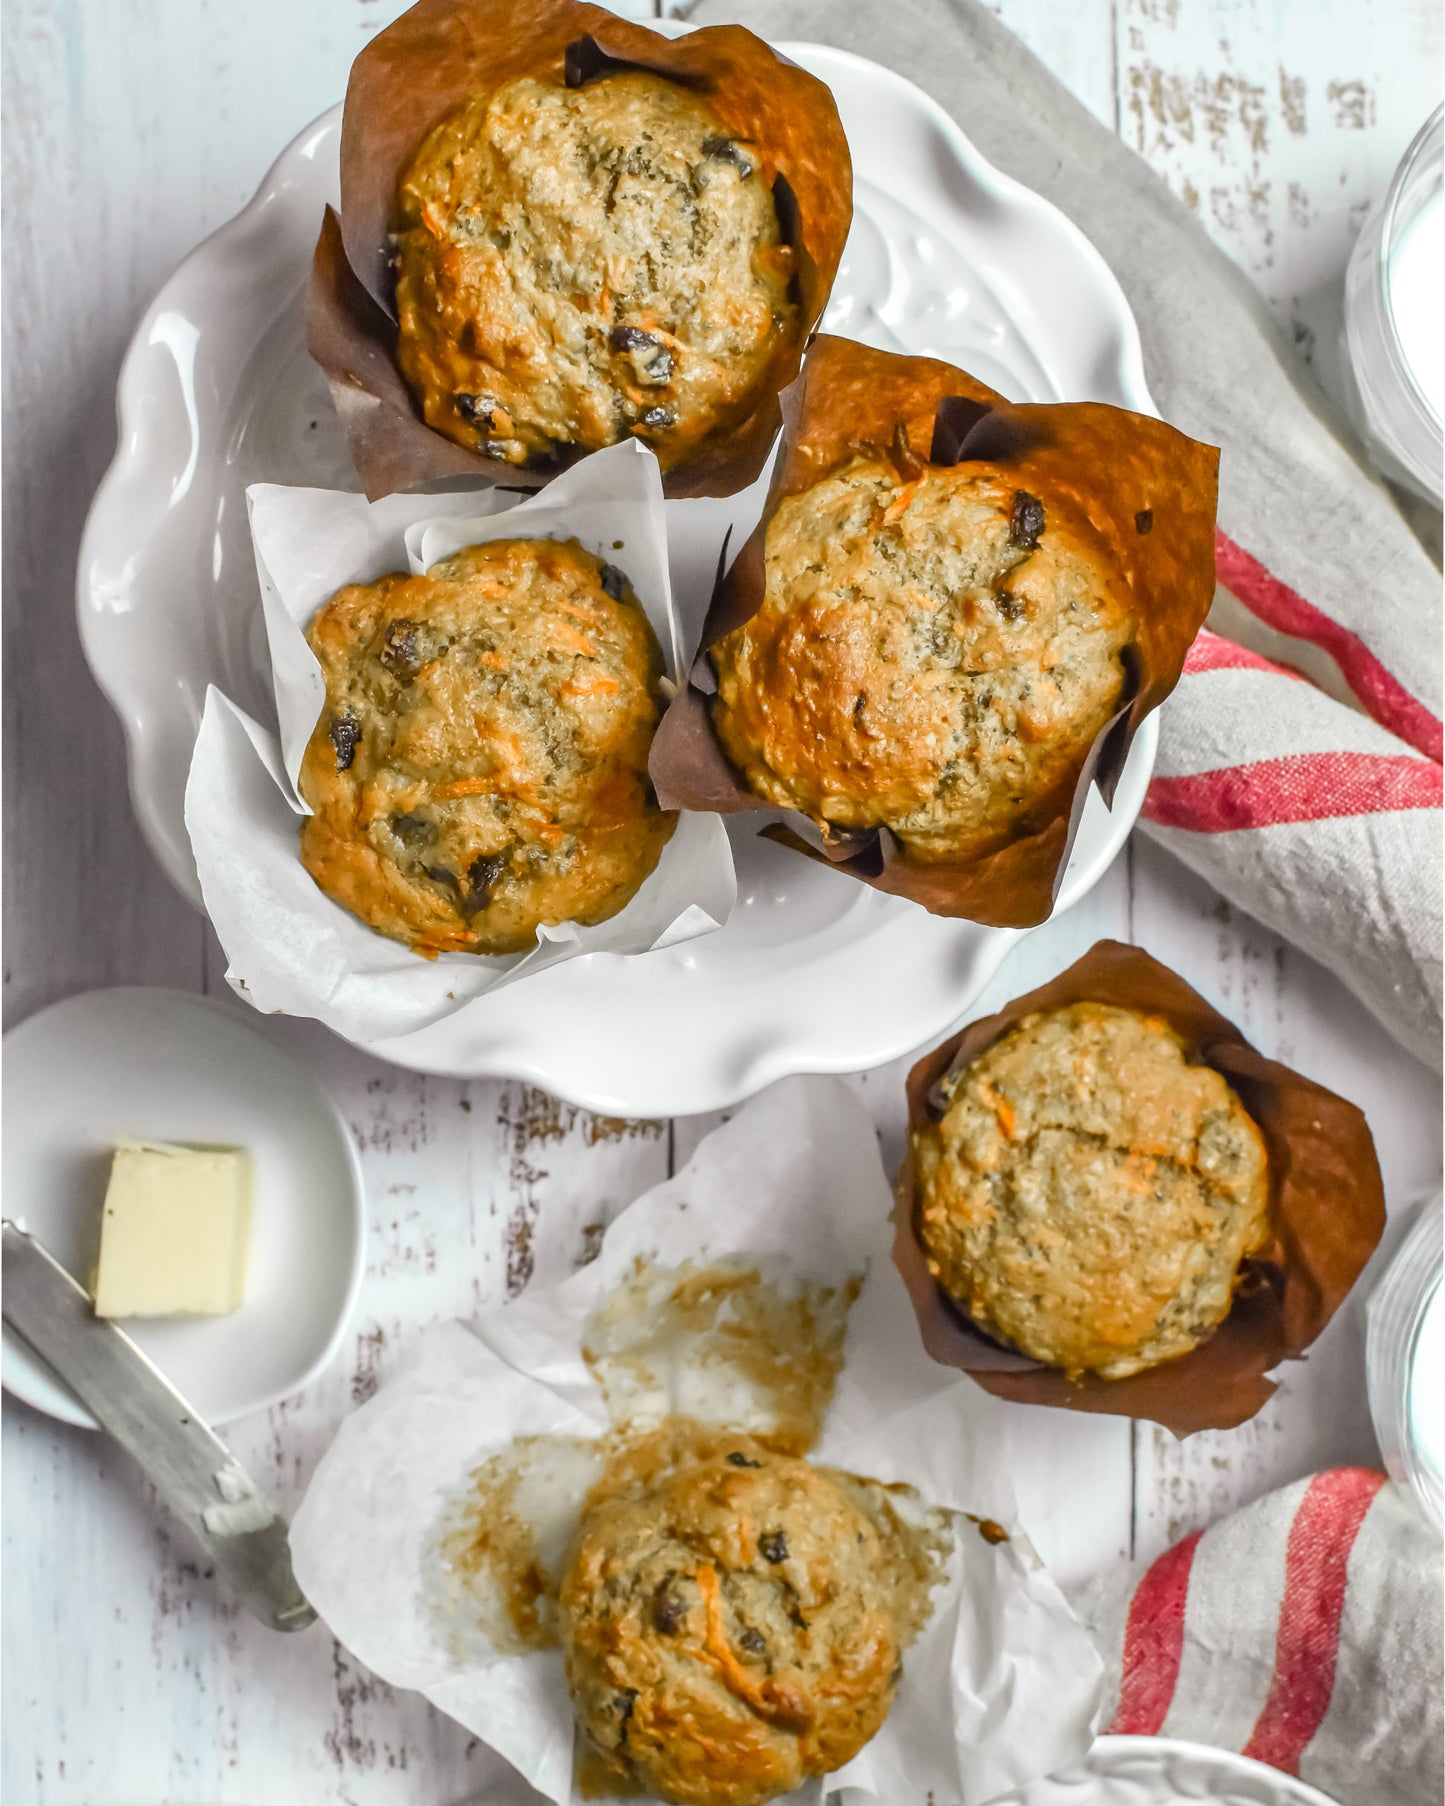 Carrot with Walnuts and Raisins Muffin (whole wheat)